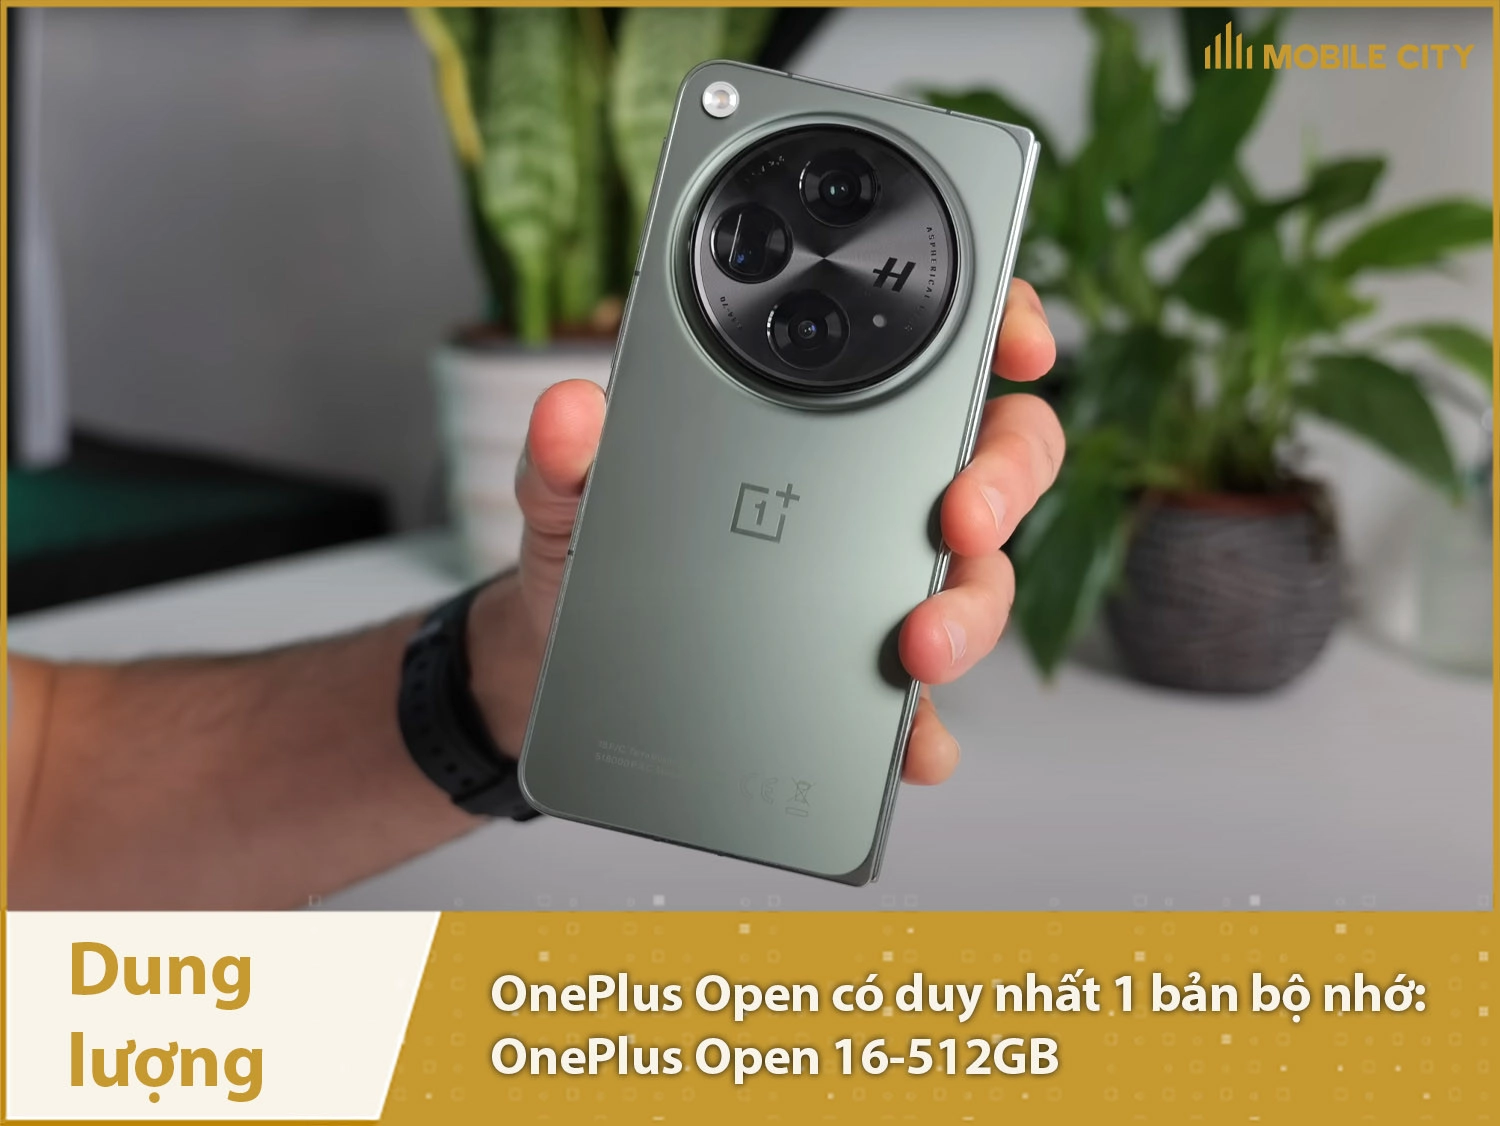  oneplus-open-dung-luong